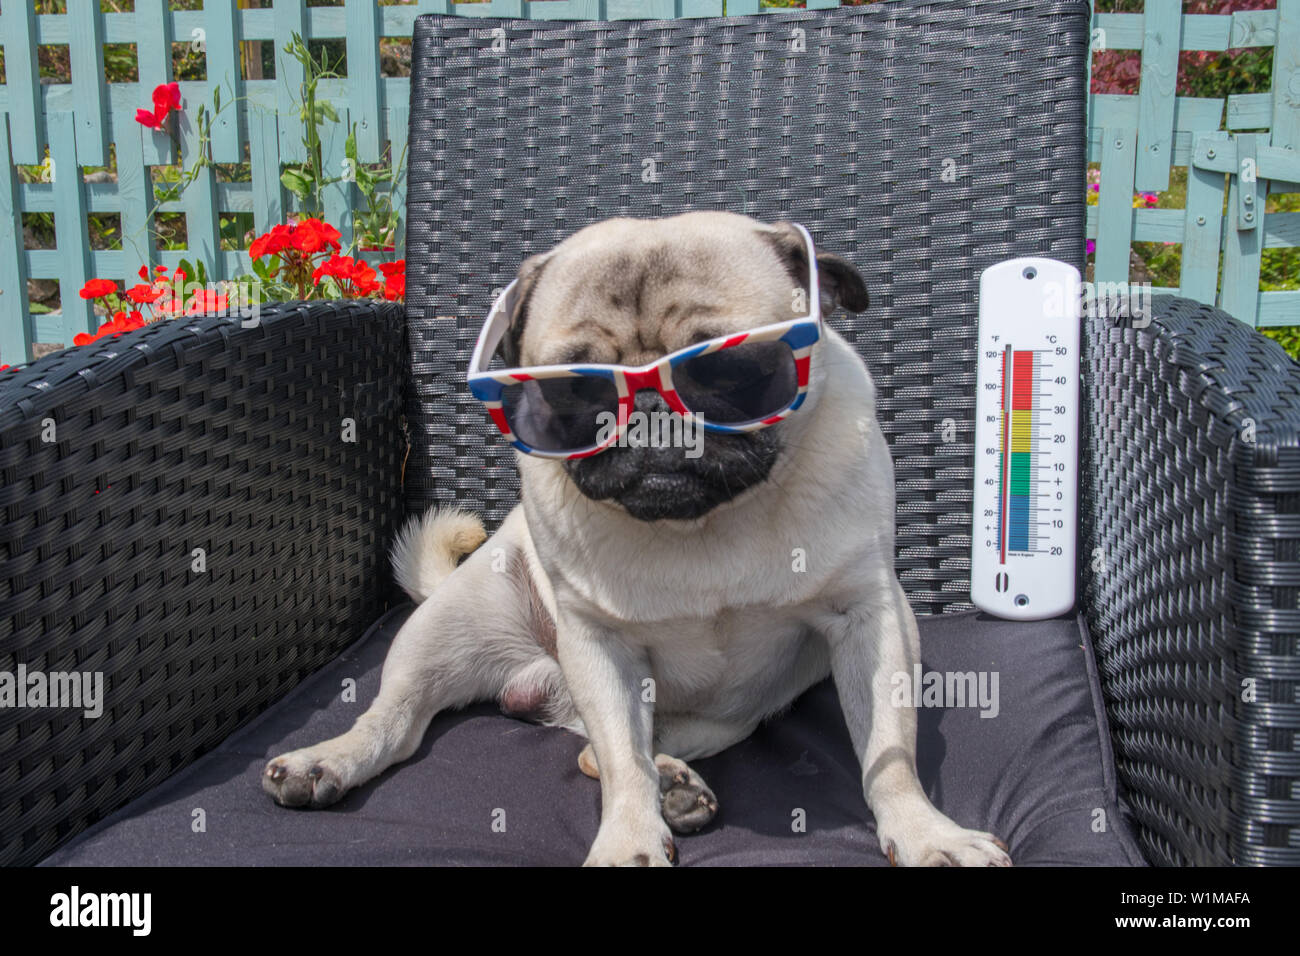 Pug dog sitting on chair in hot weather with a thermometer in the background. Stock Photo